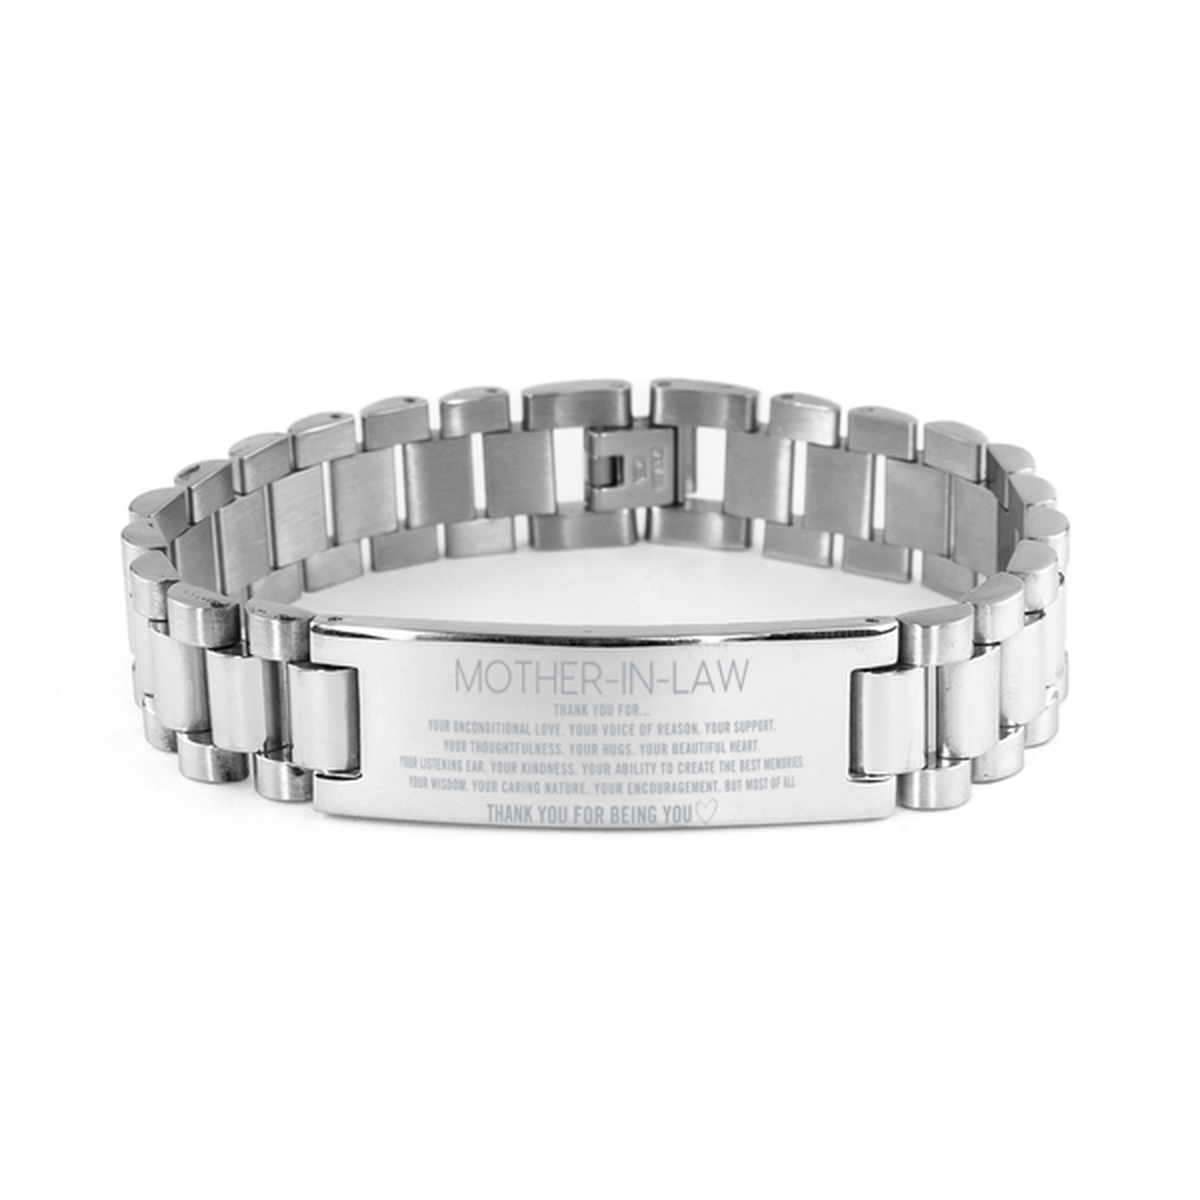 Mother-In-Law Ladder Stainless Steel Bracelet Custom, Engraved Gifts For Mother-In-Law Christmas Graduation Birthday Gifts for Men Women Mother-In-Law Thank you for Your unconditional love